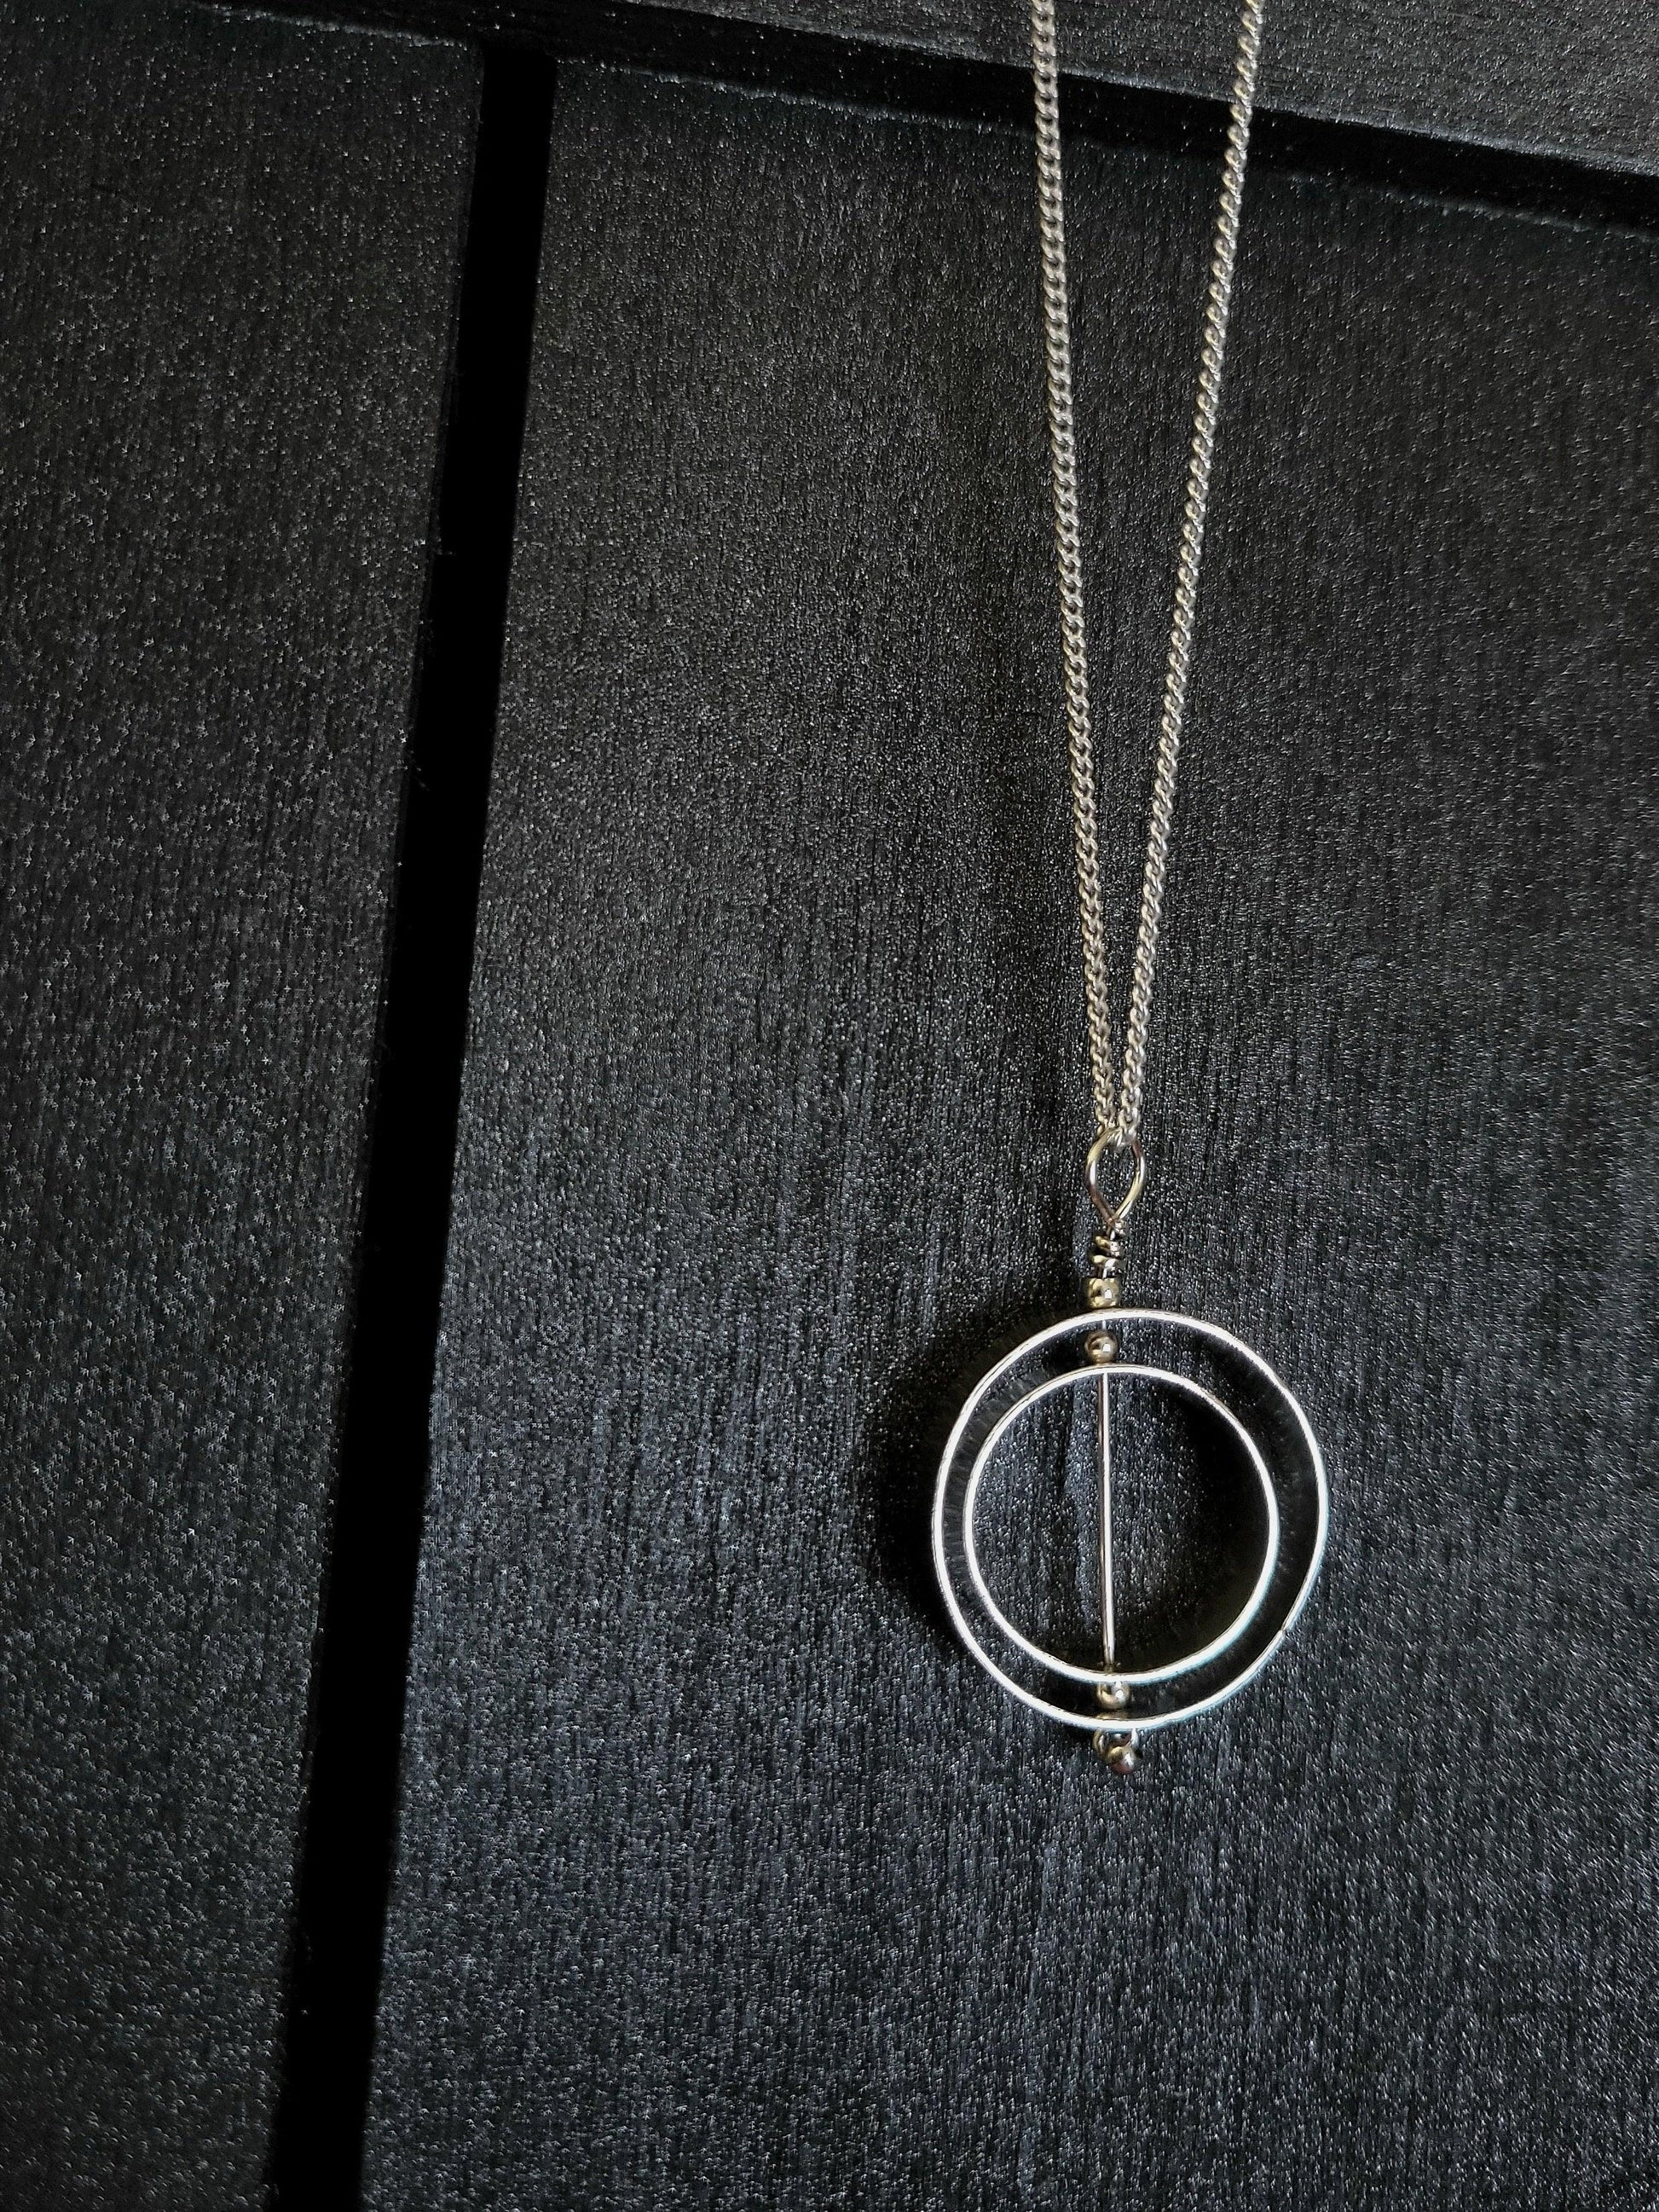 Double circle karma necklace by Jaclyn Nicole, inspirational jewelry artist.